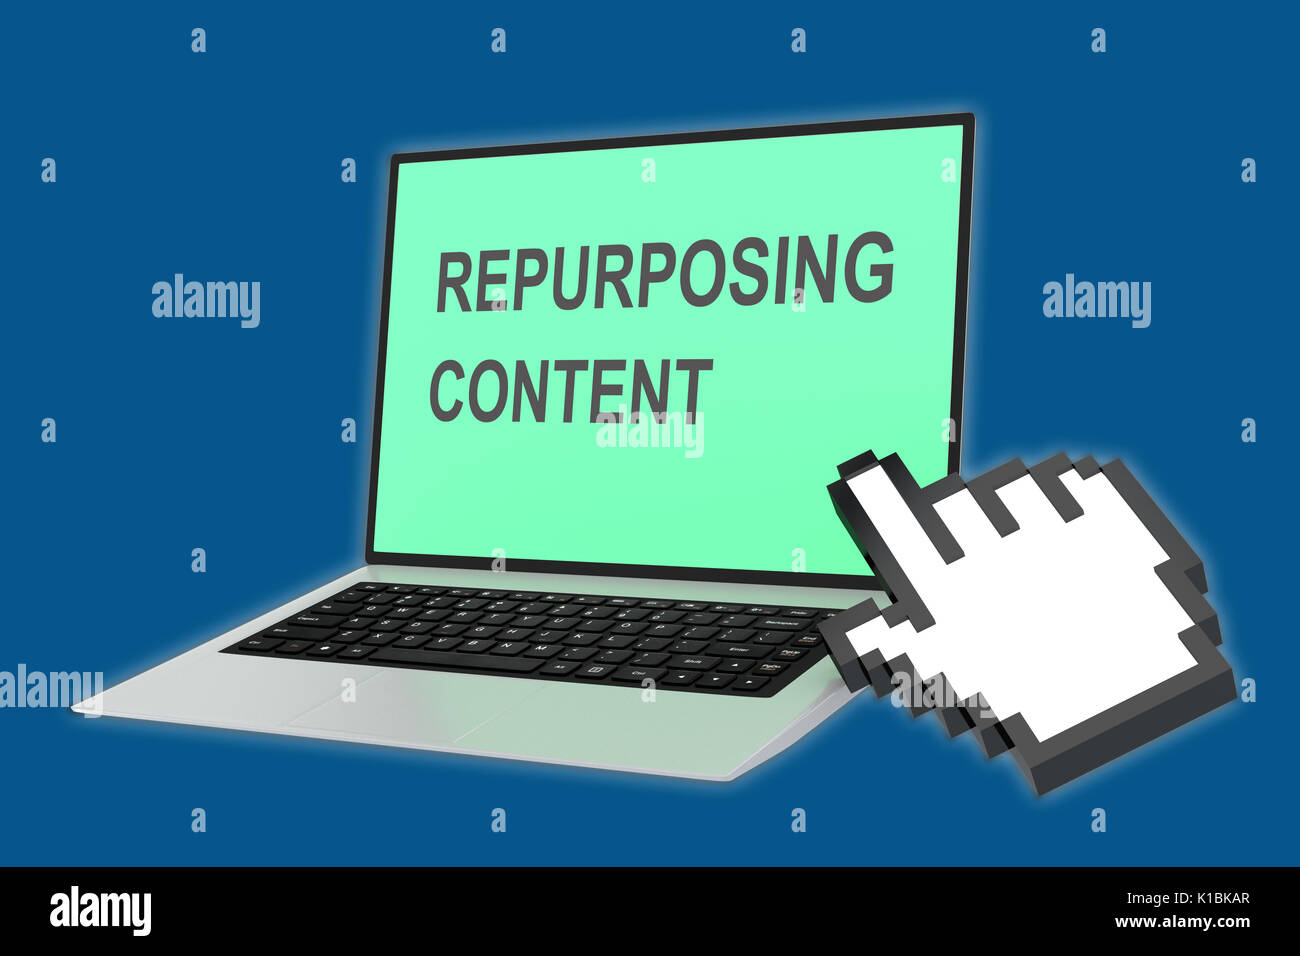 Render illustration of Repurposing Content title with pointing hand icon pointing at the laptop screen. Stock Photo